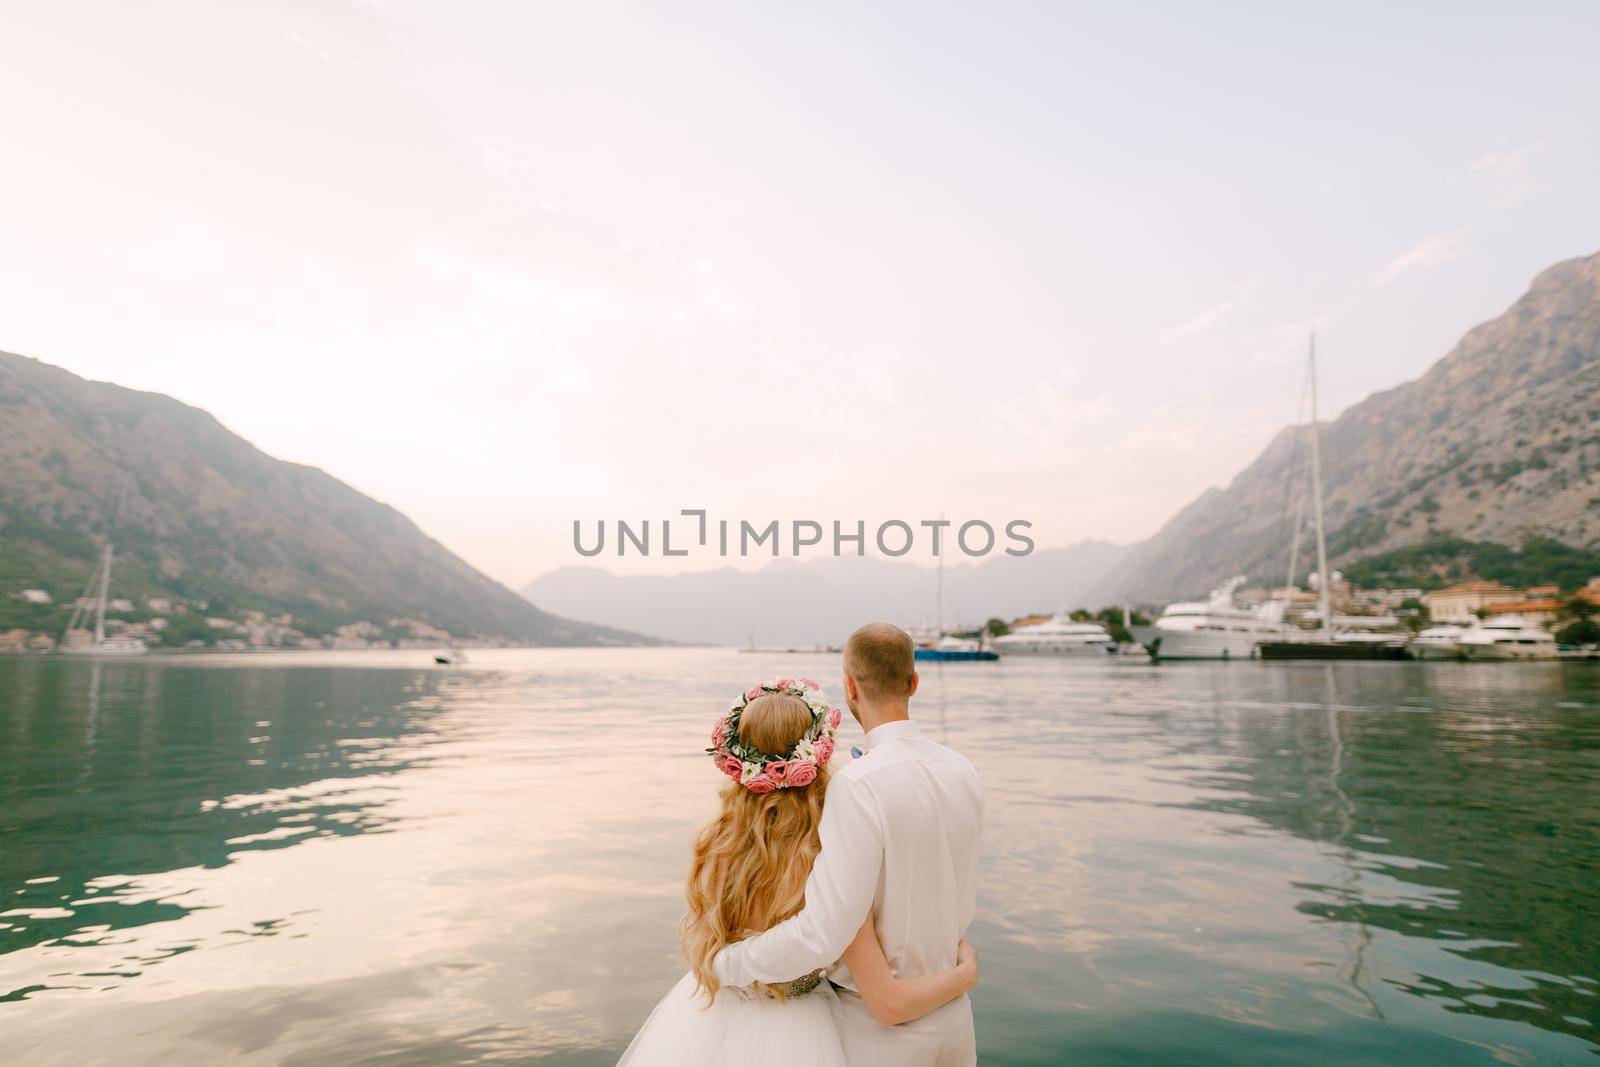 The bride in a wreath and groom hug on the pier near the old town of Kotor in the Bay of Kotor, close-up. High quality photo